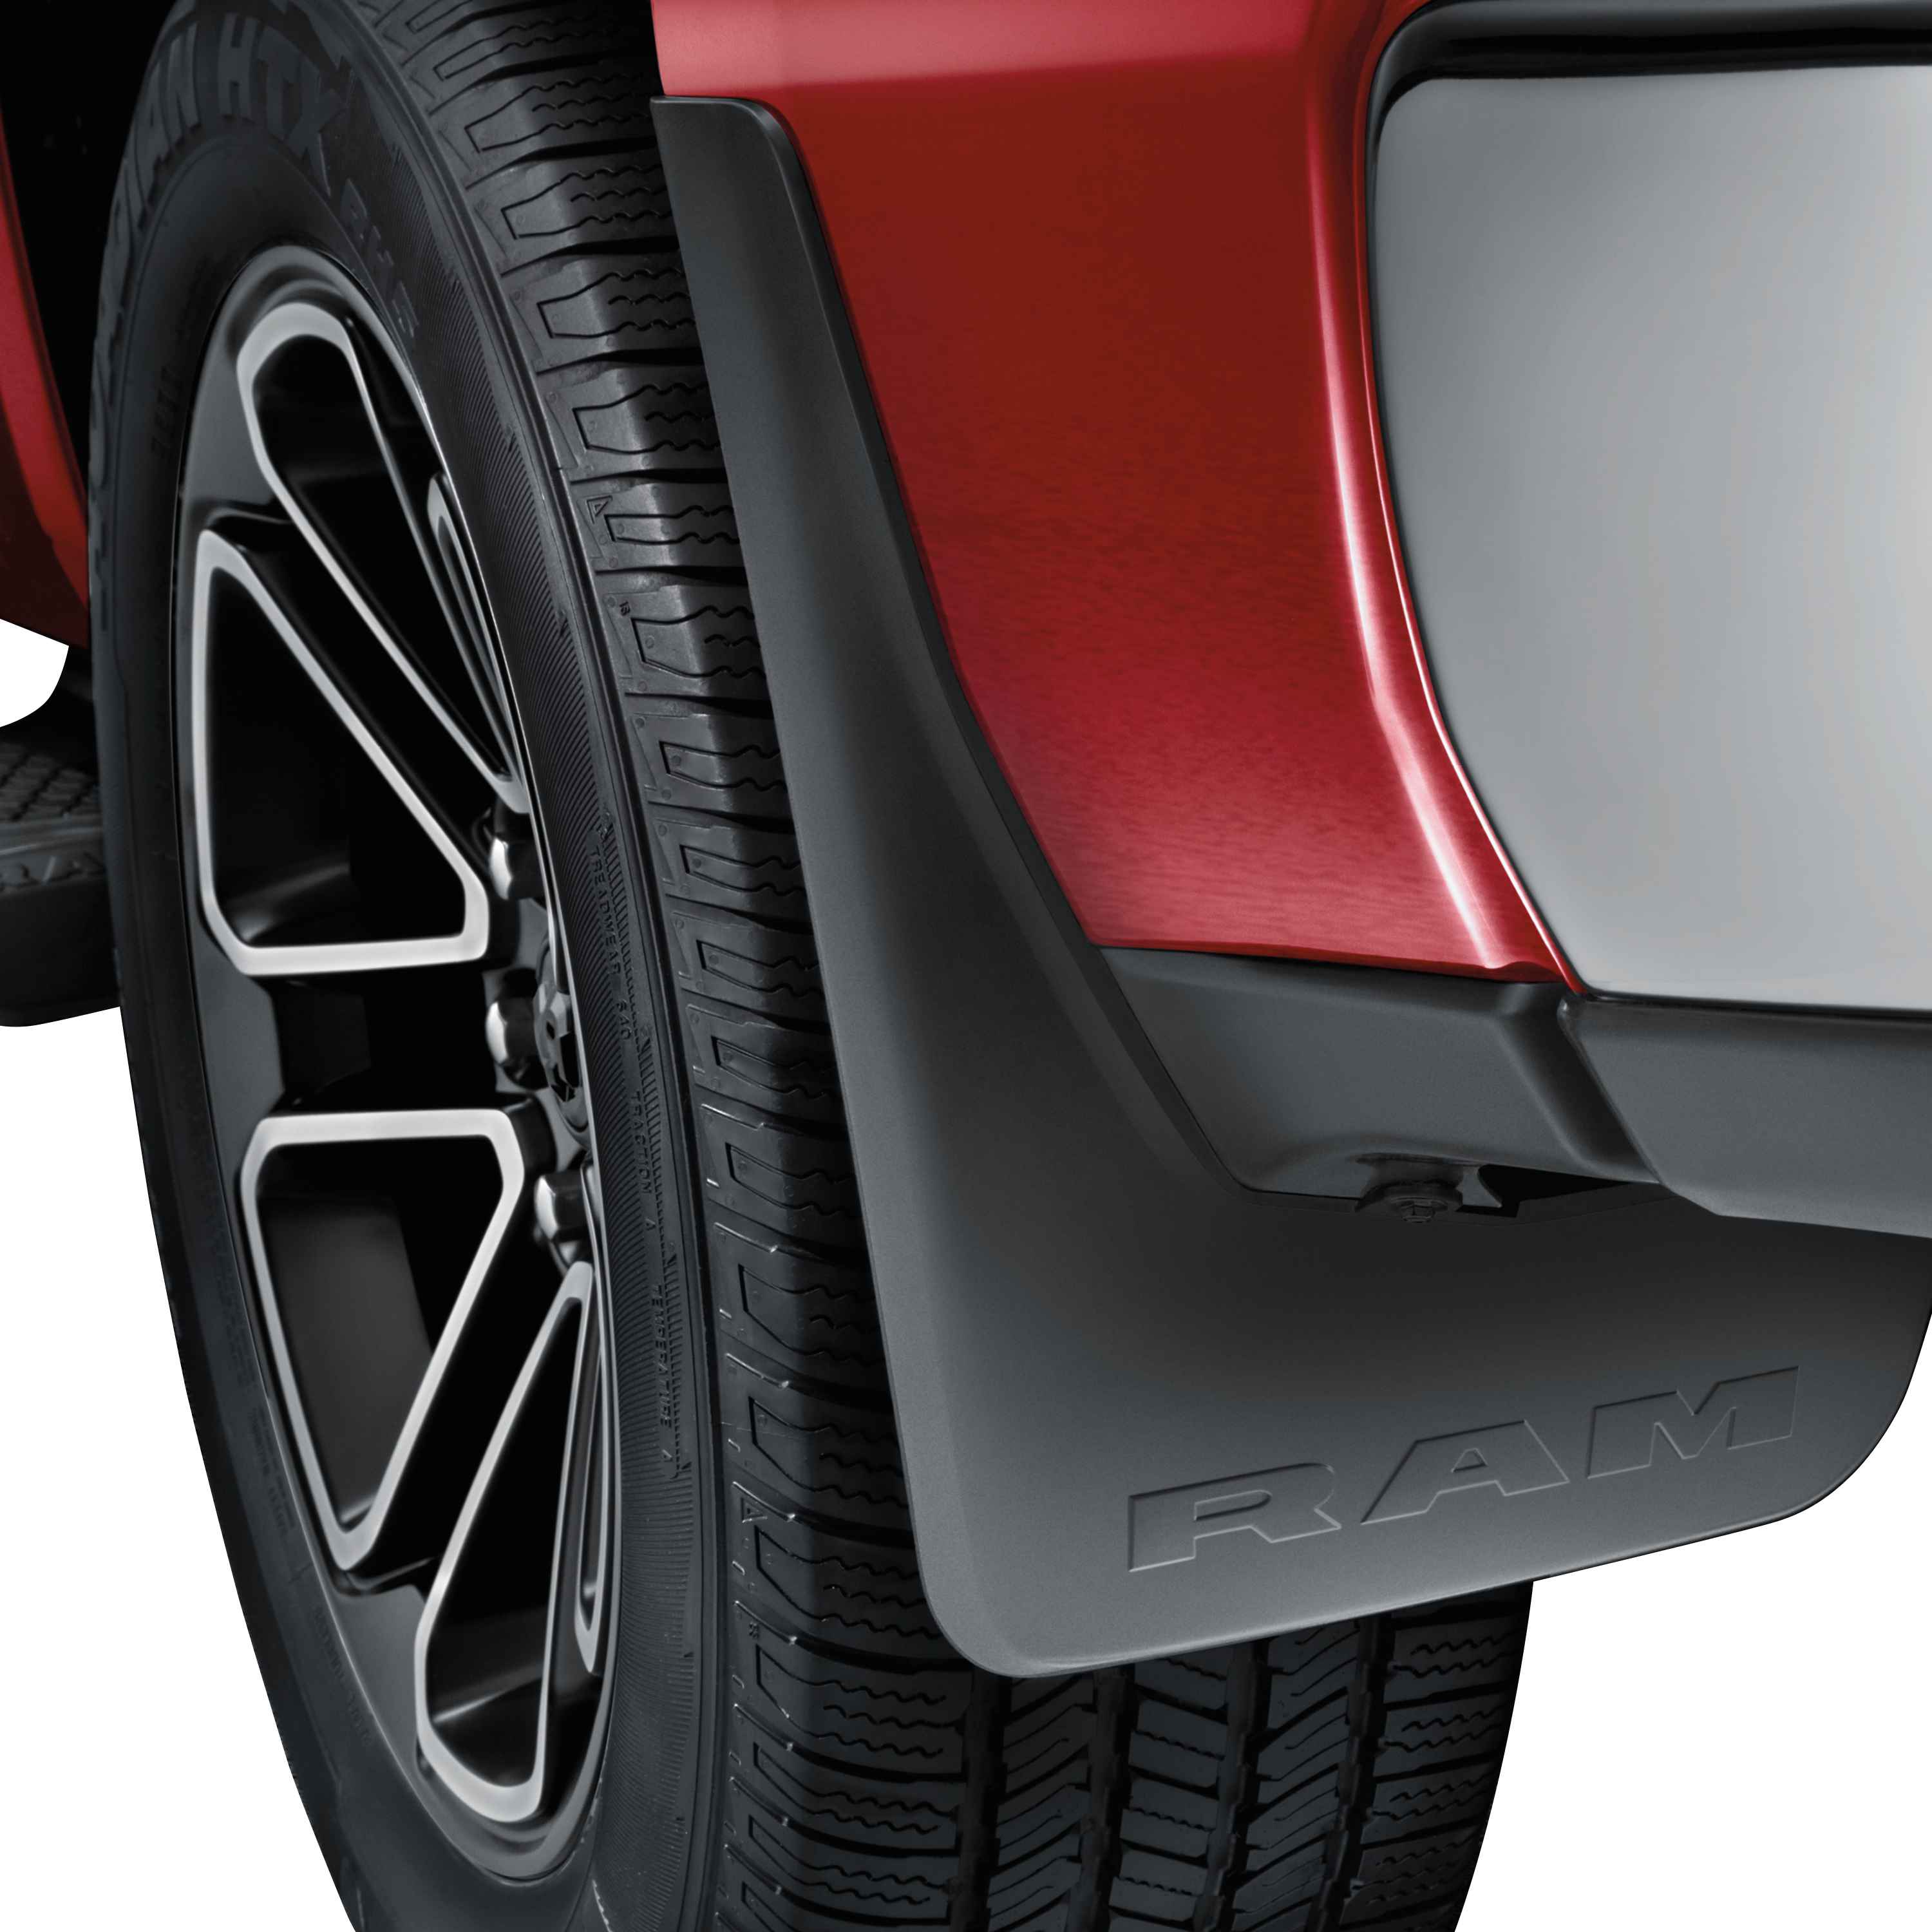 OEM 2019 Ram 1500 Splash Guards, Heavy-Duty Rubber (Rear) for Vehicles with production Fender Flares (Part #82216216AA)